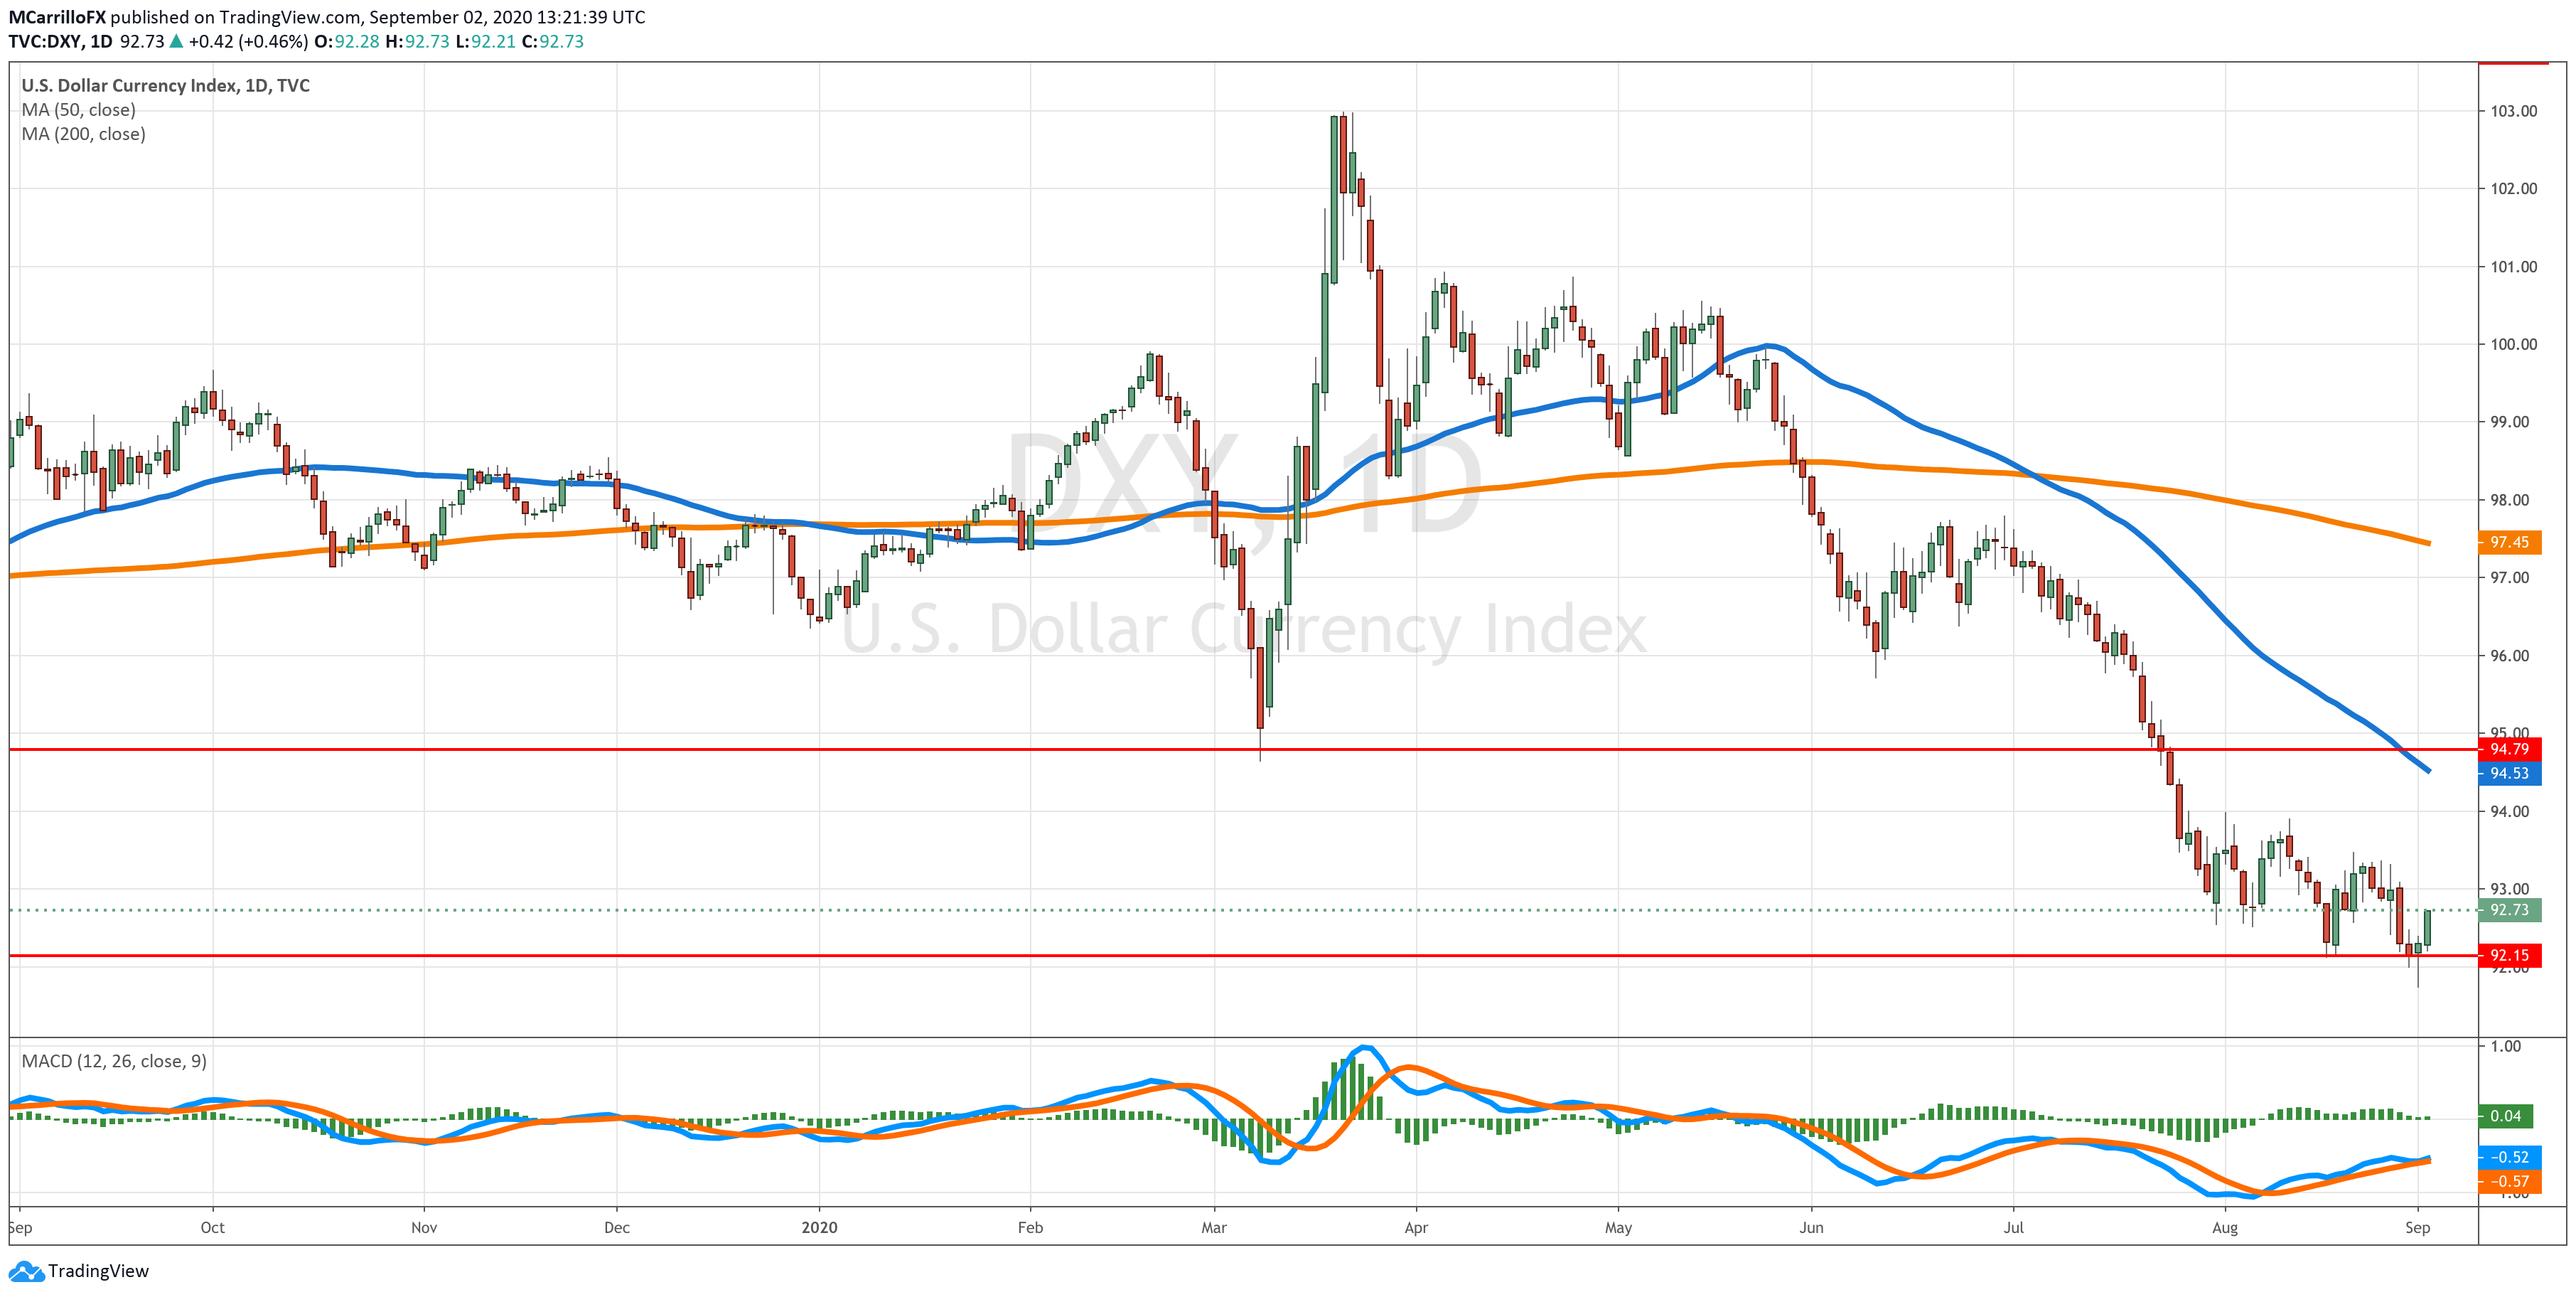 DXY chart diario sept 2